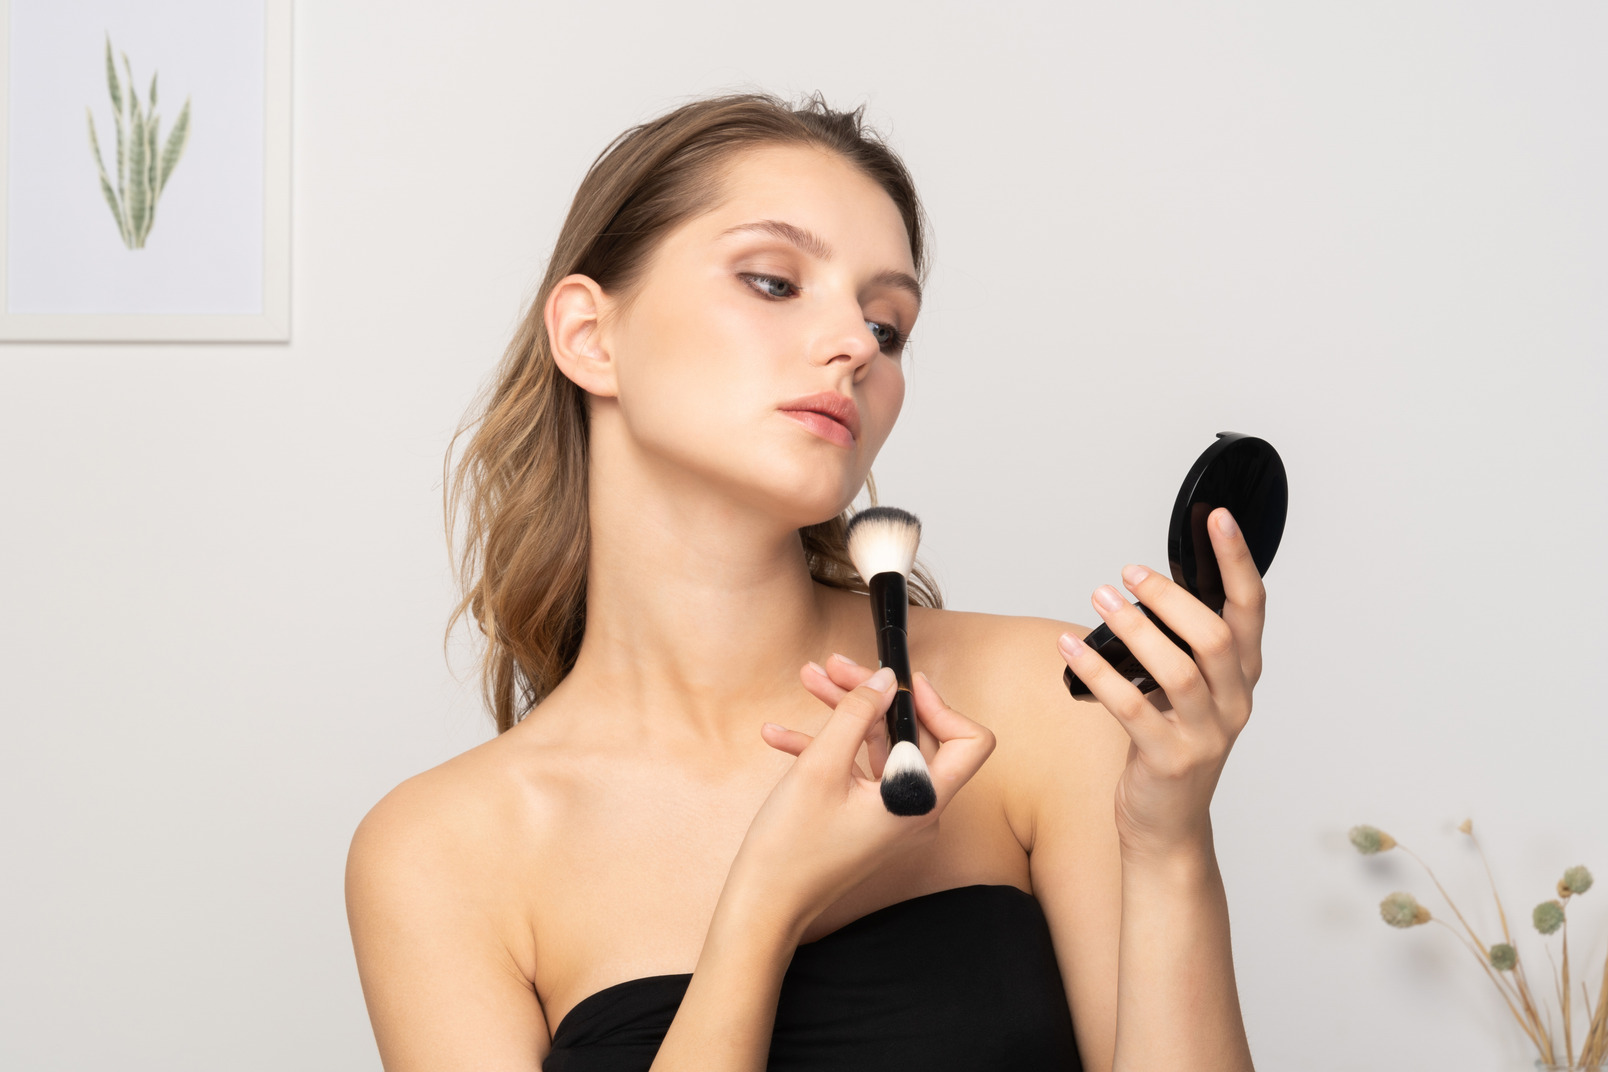 Front view of a young woman applying face powder while holding a mirror